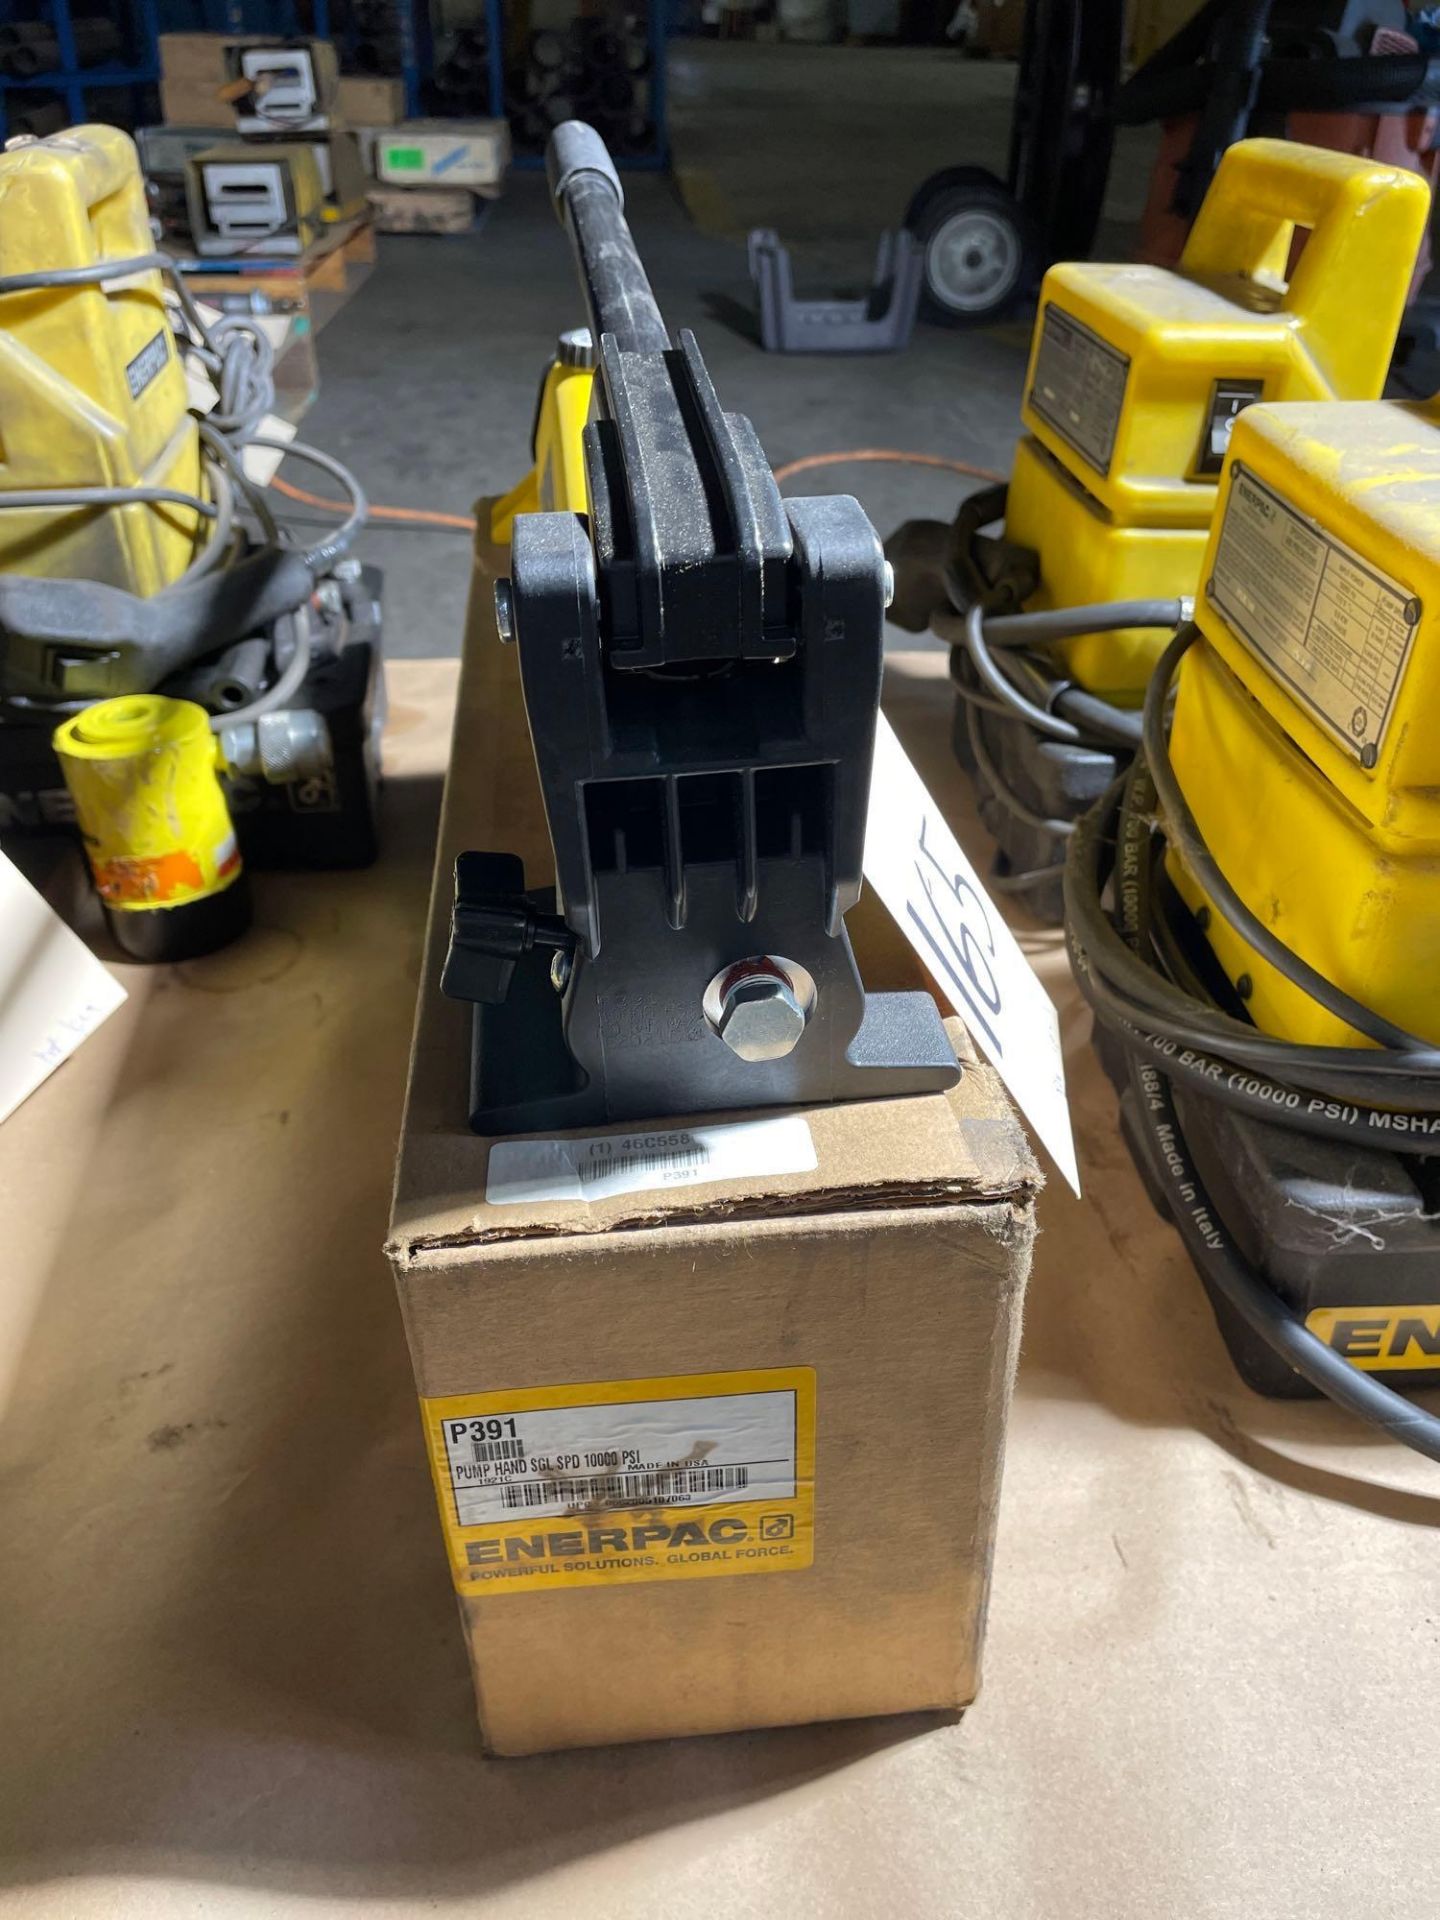 New in Box Enerpac Pump Hand Model P391 - Image 4 of 6